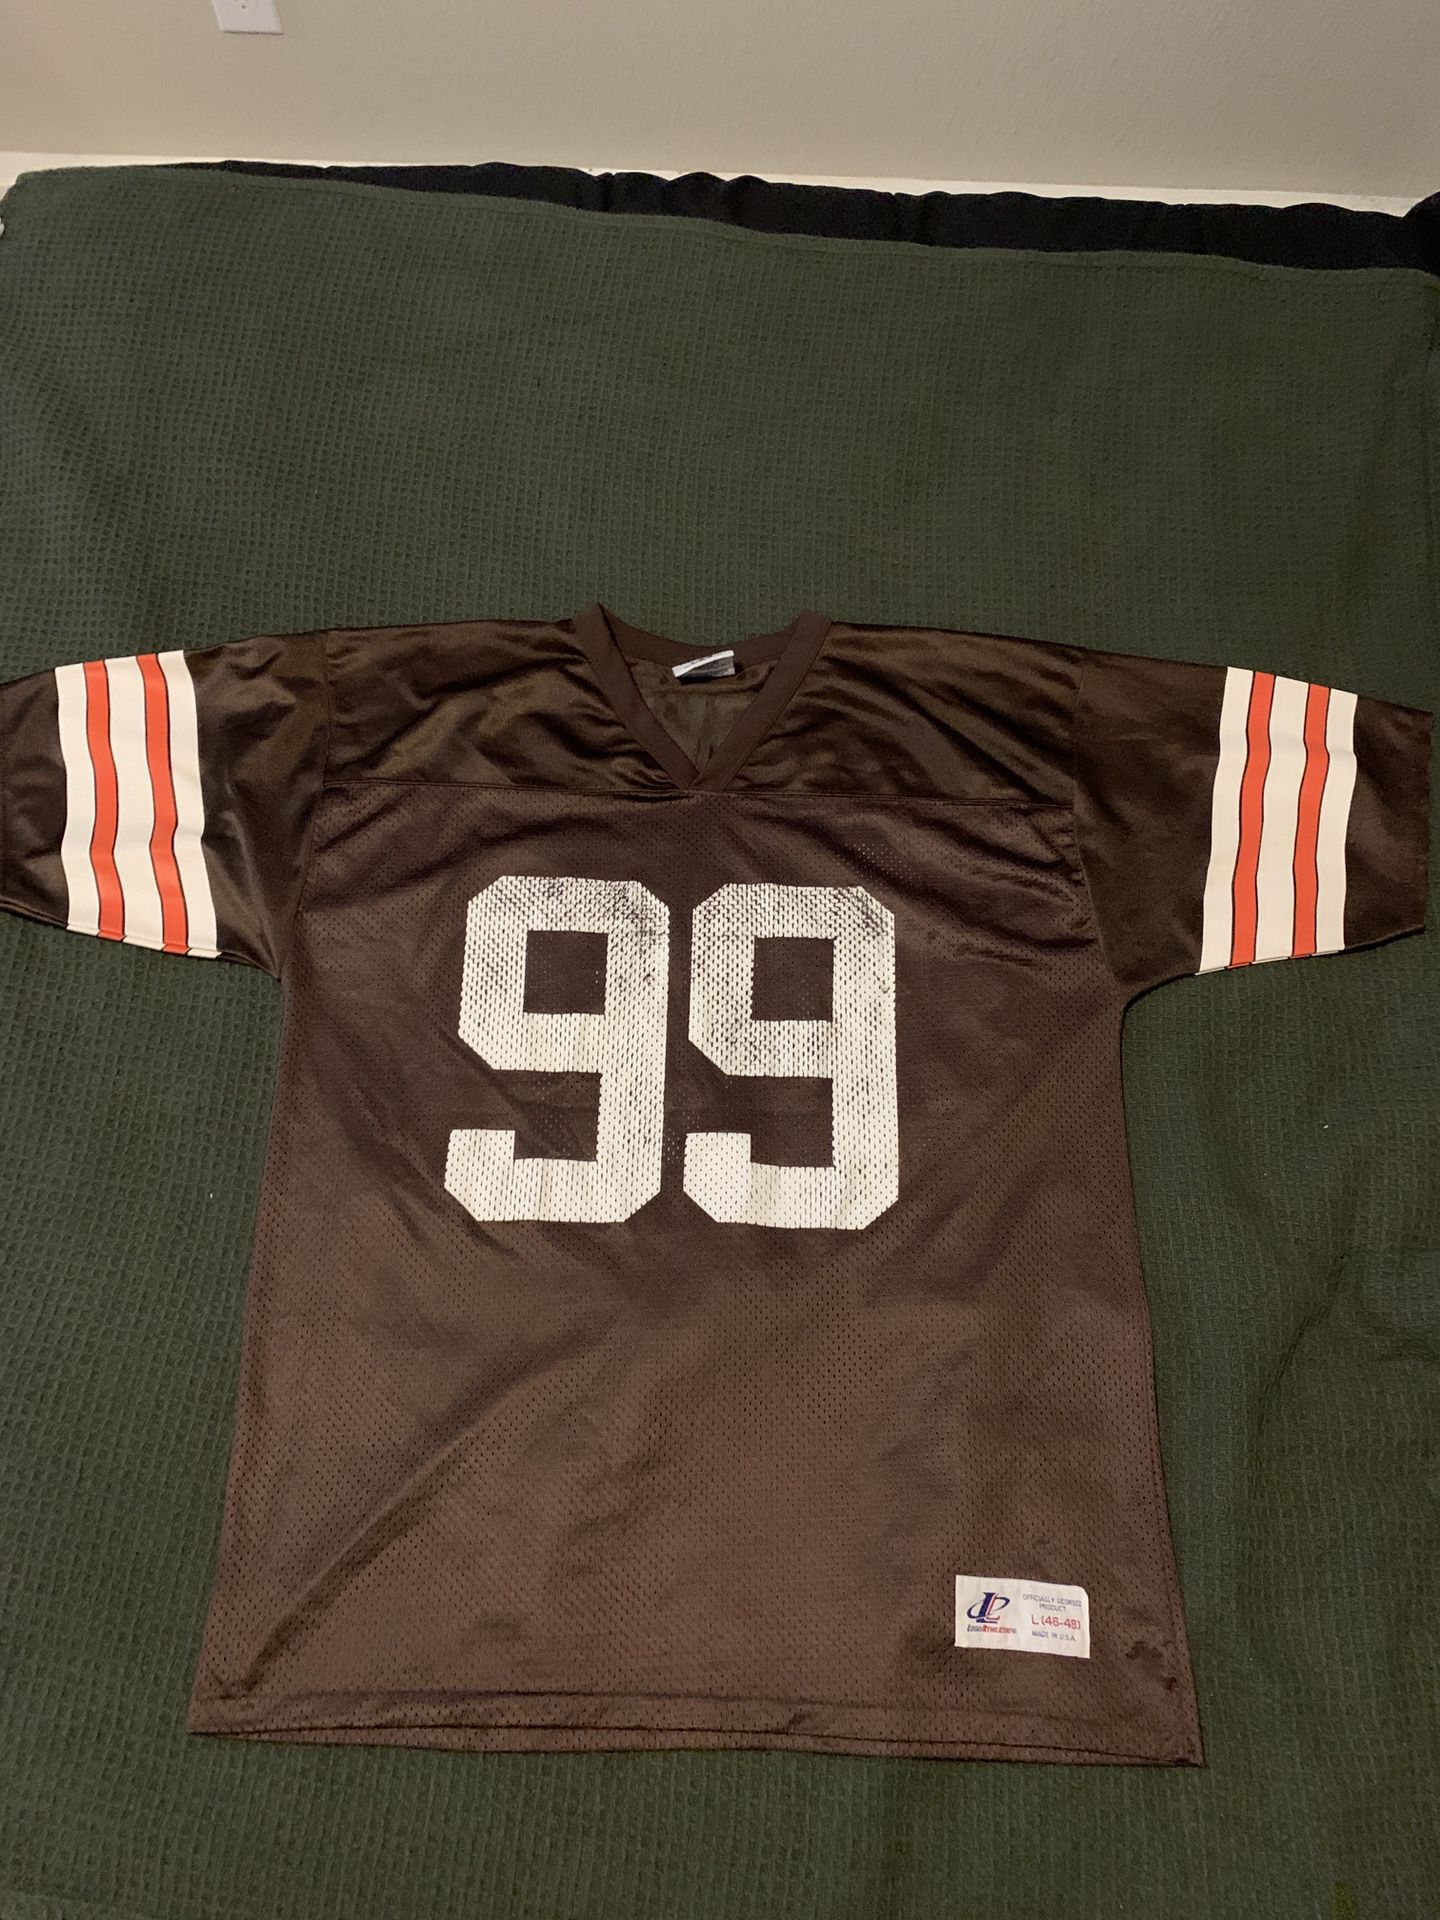 Cleveland Browns #99 Jersey!